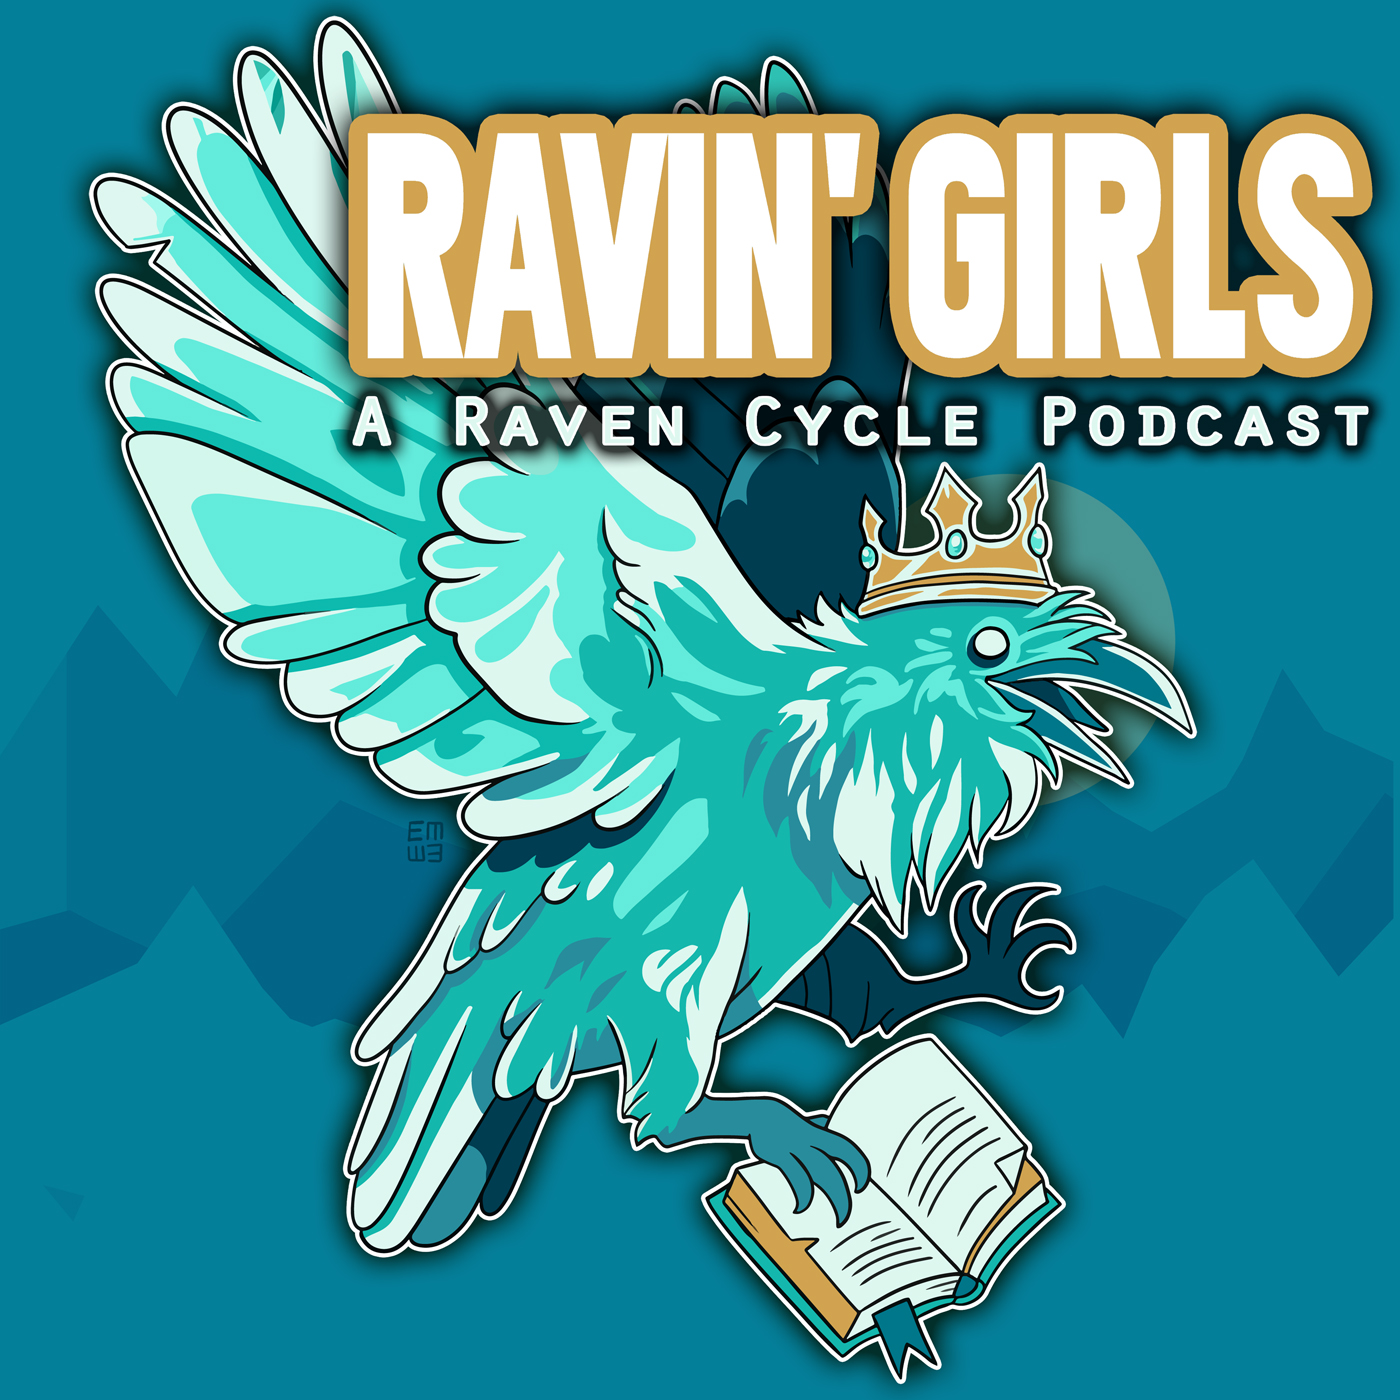 Ravin' Girls Episode 22: The Kinks Are Always A Problem